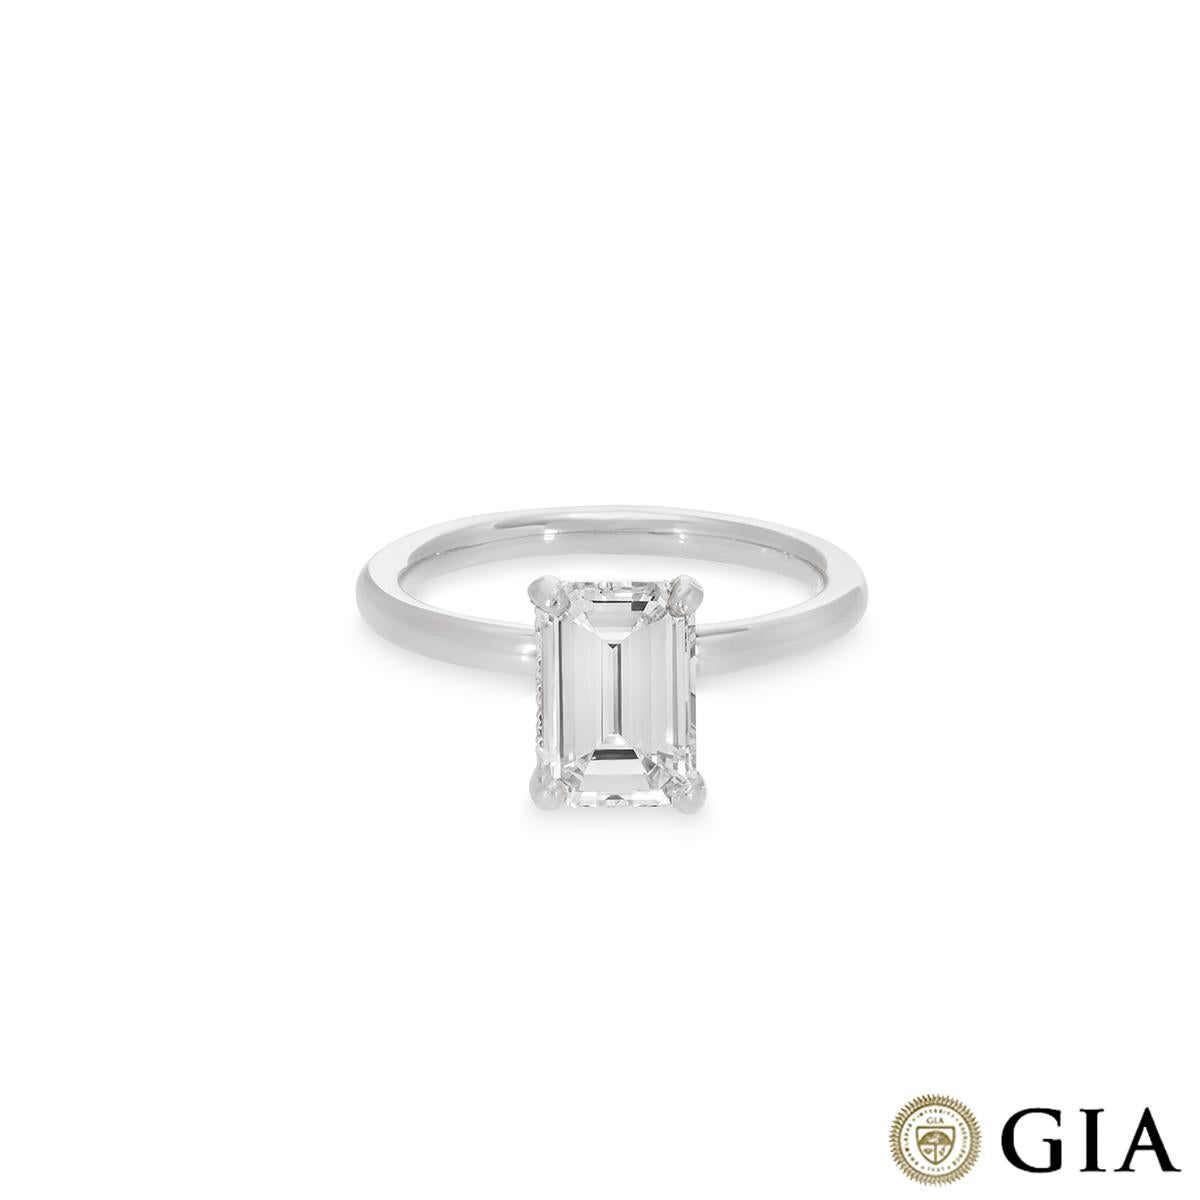 GIA Certified Platinum Emerald Cut Diamond Engagement Ring 1.80 Carat H/VS1 In New Condition For Sale In London, GB